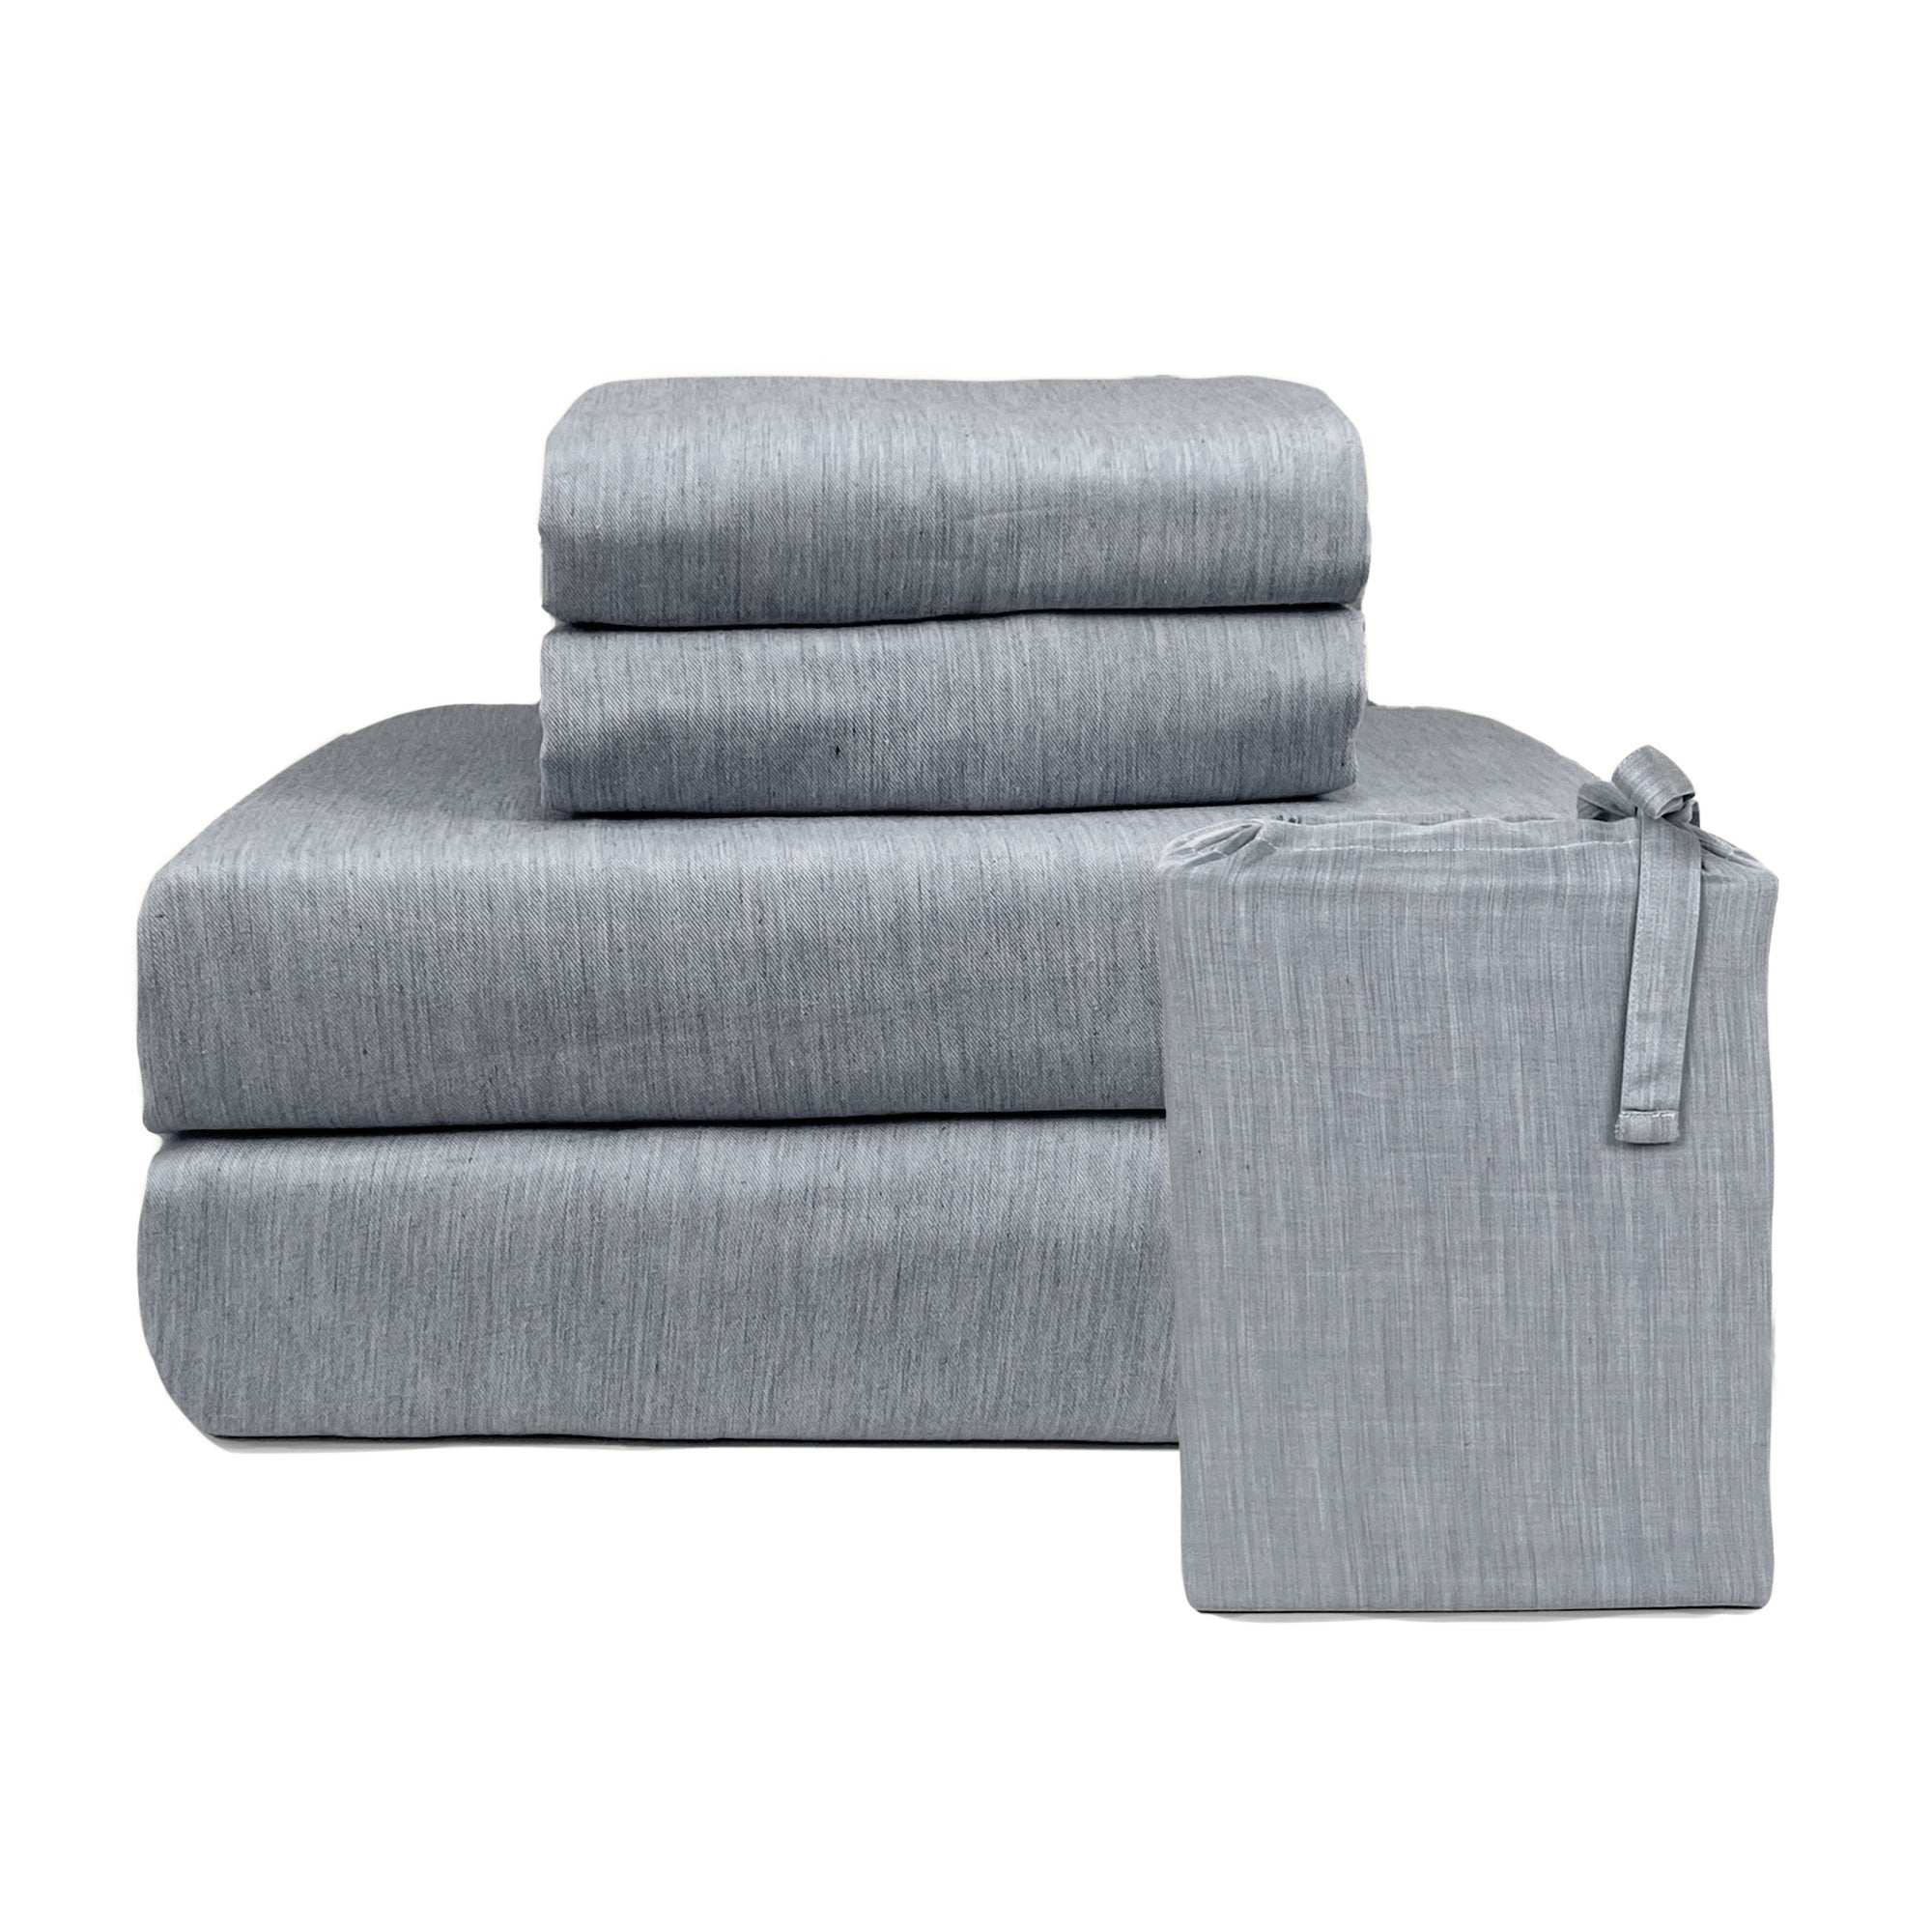 MELANGE Bamboo Sheet Sets -  Cuddle-Worthy, Comfortable For Better Sleep, Quality and Hypoallergenic Bed Cover Sets - Silver